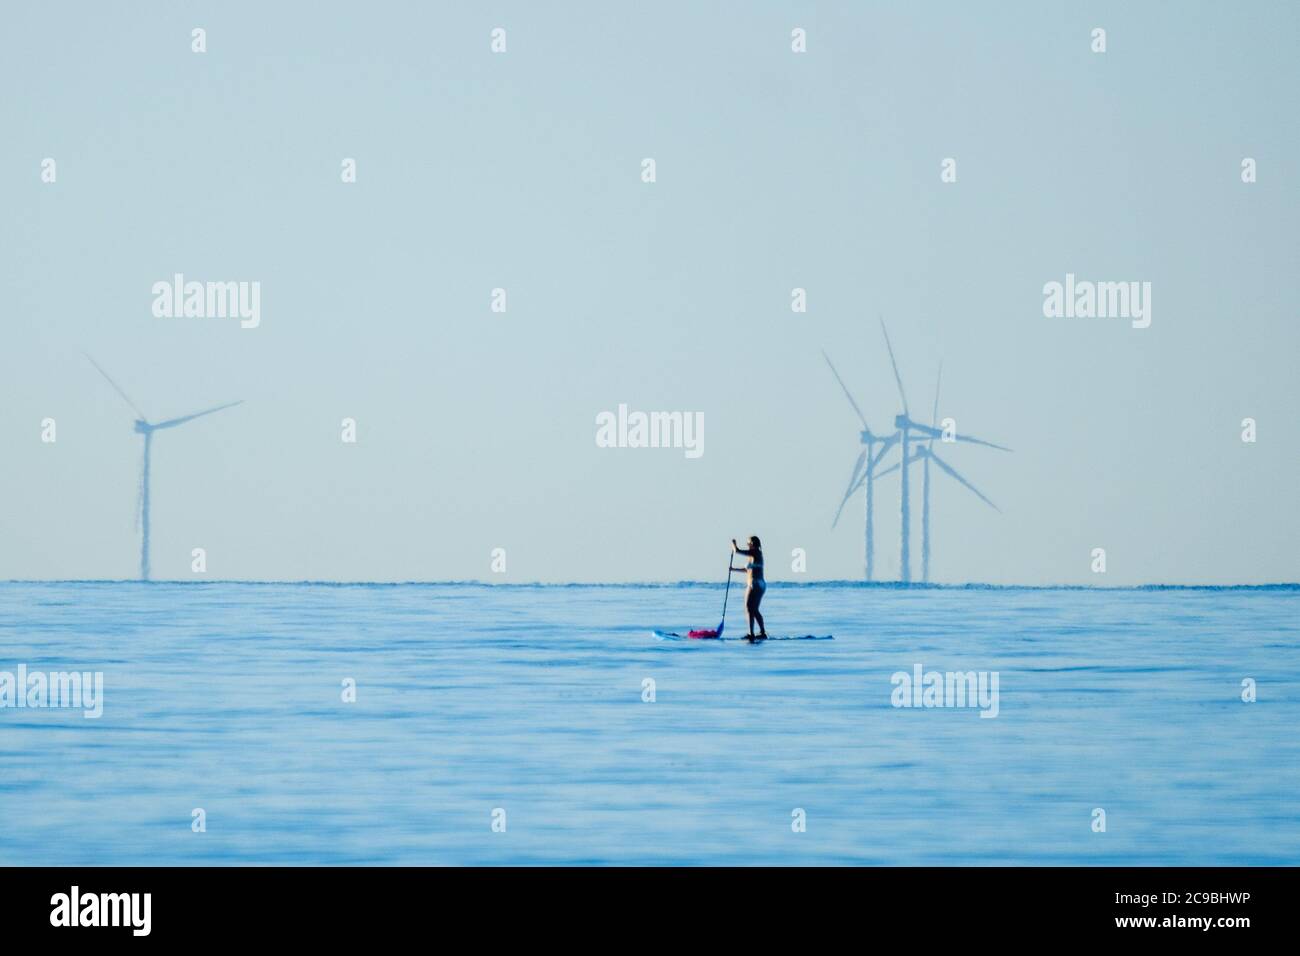 Worthing Beach, Worthing, UK. 30th July, 2020. Paddleboarders enjoy the calm morning sea . With a clear blue sky and flat waters people on paddle boards enjoy the early morning off the Sussex coast. Rampion Wind Farm can be seen 13-20km offshore. Picture by Credit: Julie Edwards/Alamy Live News Stock Photo